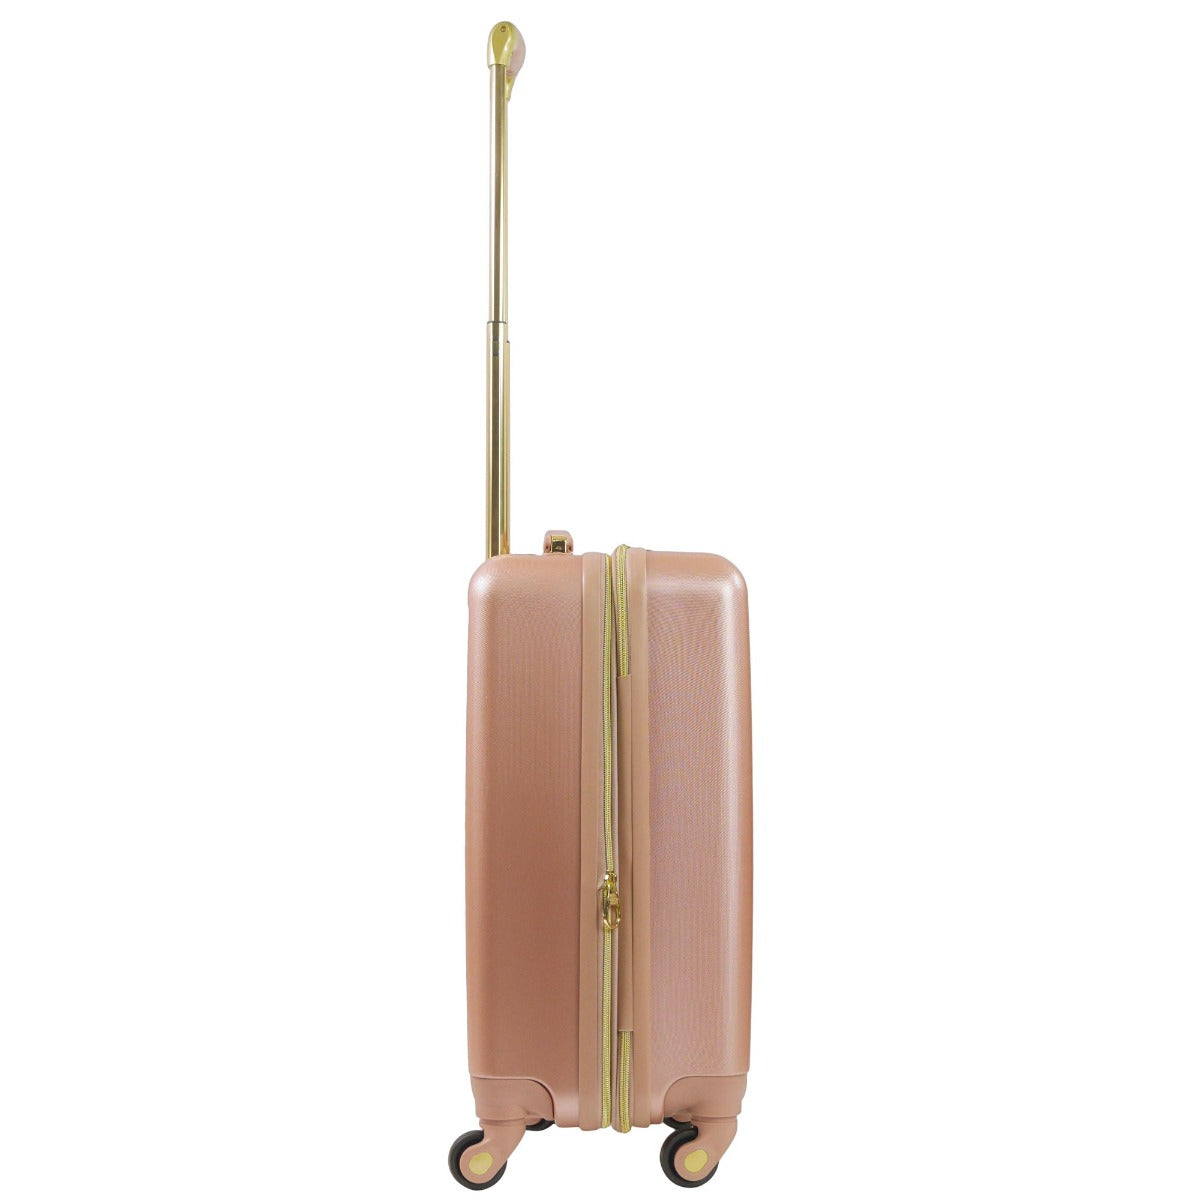 Christian Siriano Addie 22" hardside spinner suitcase rose gold - best dependable luggage